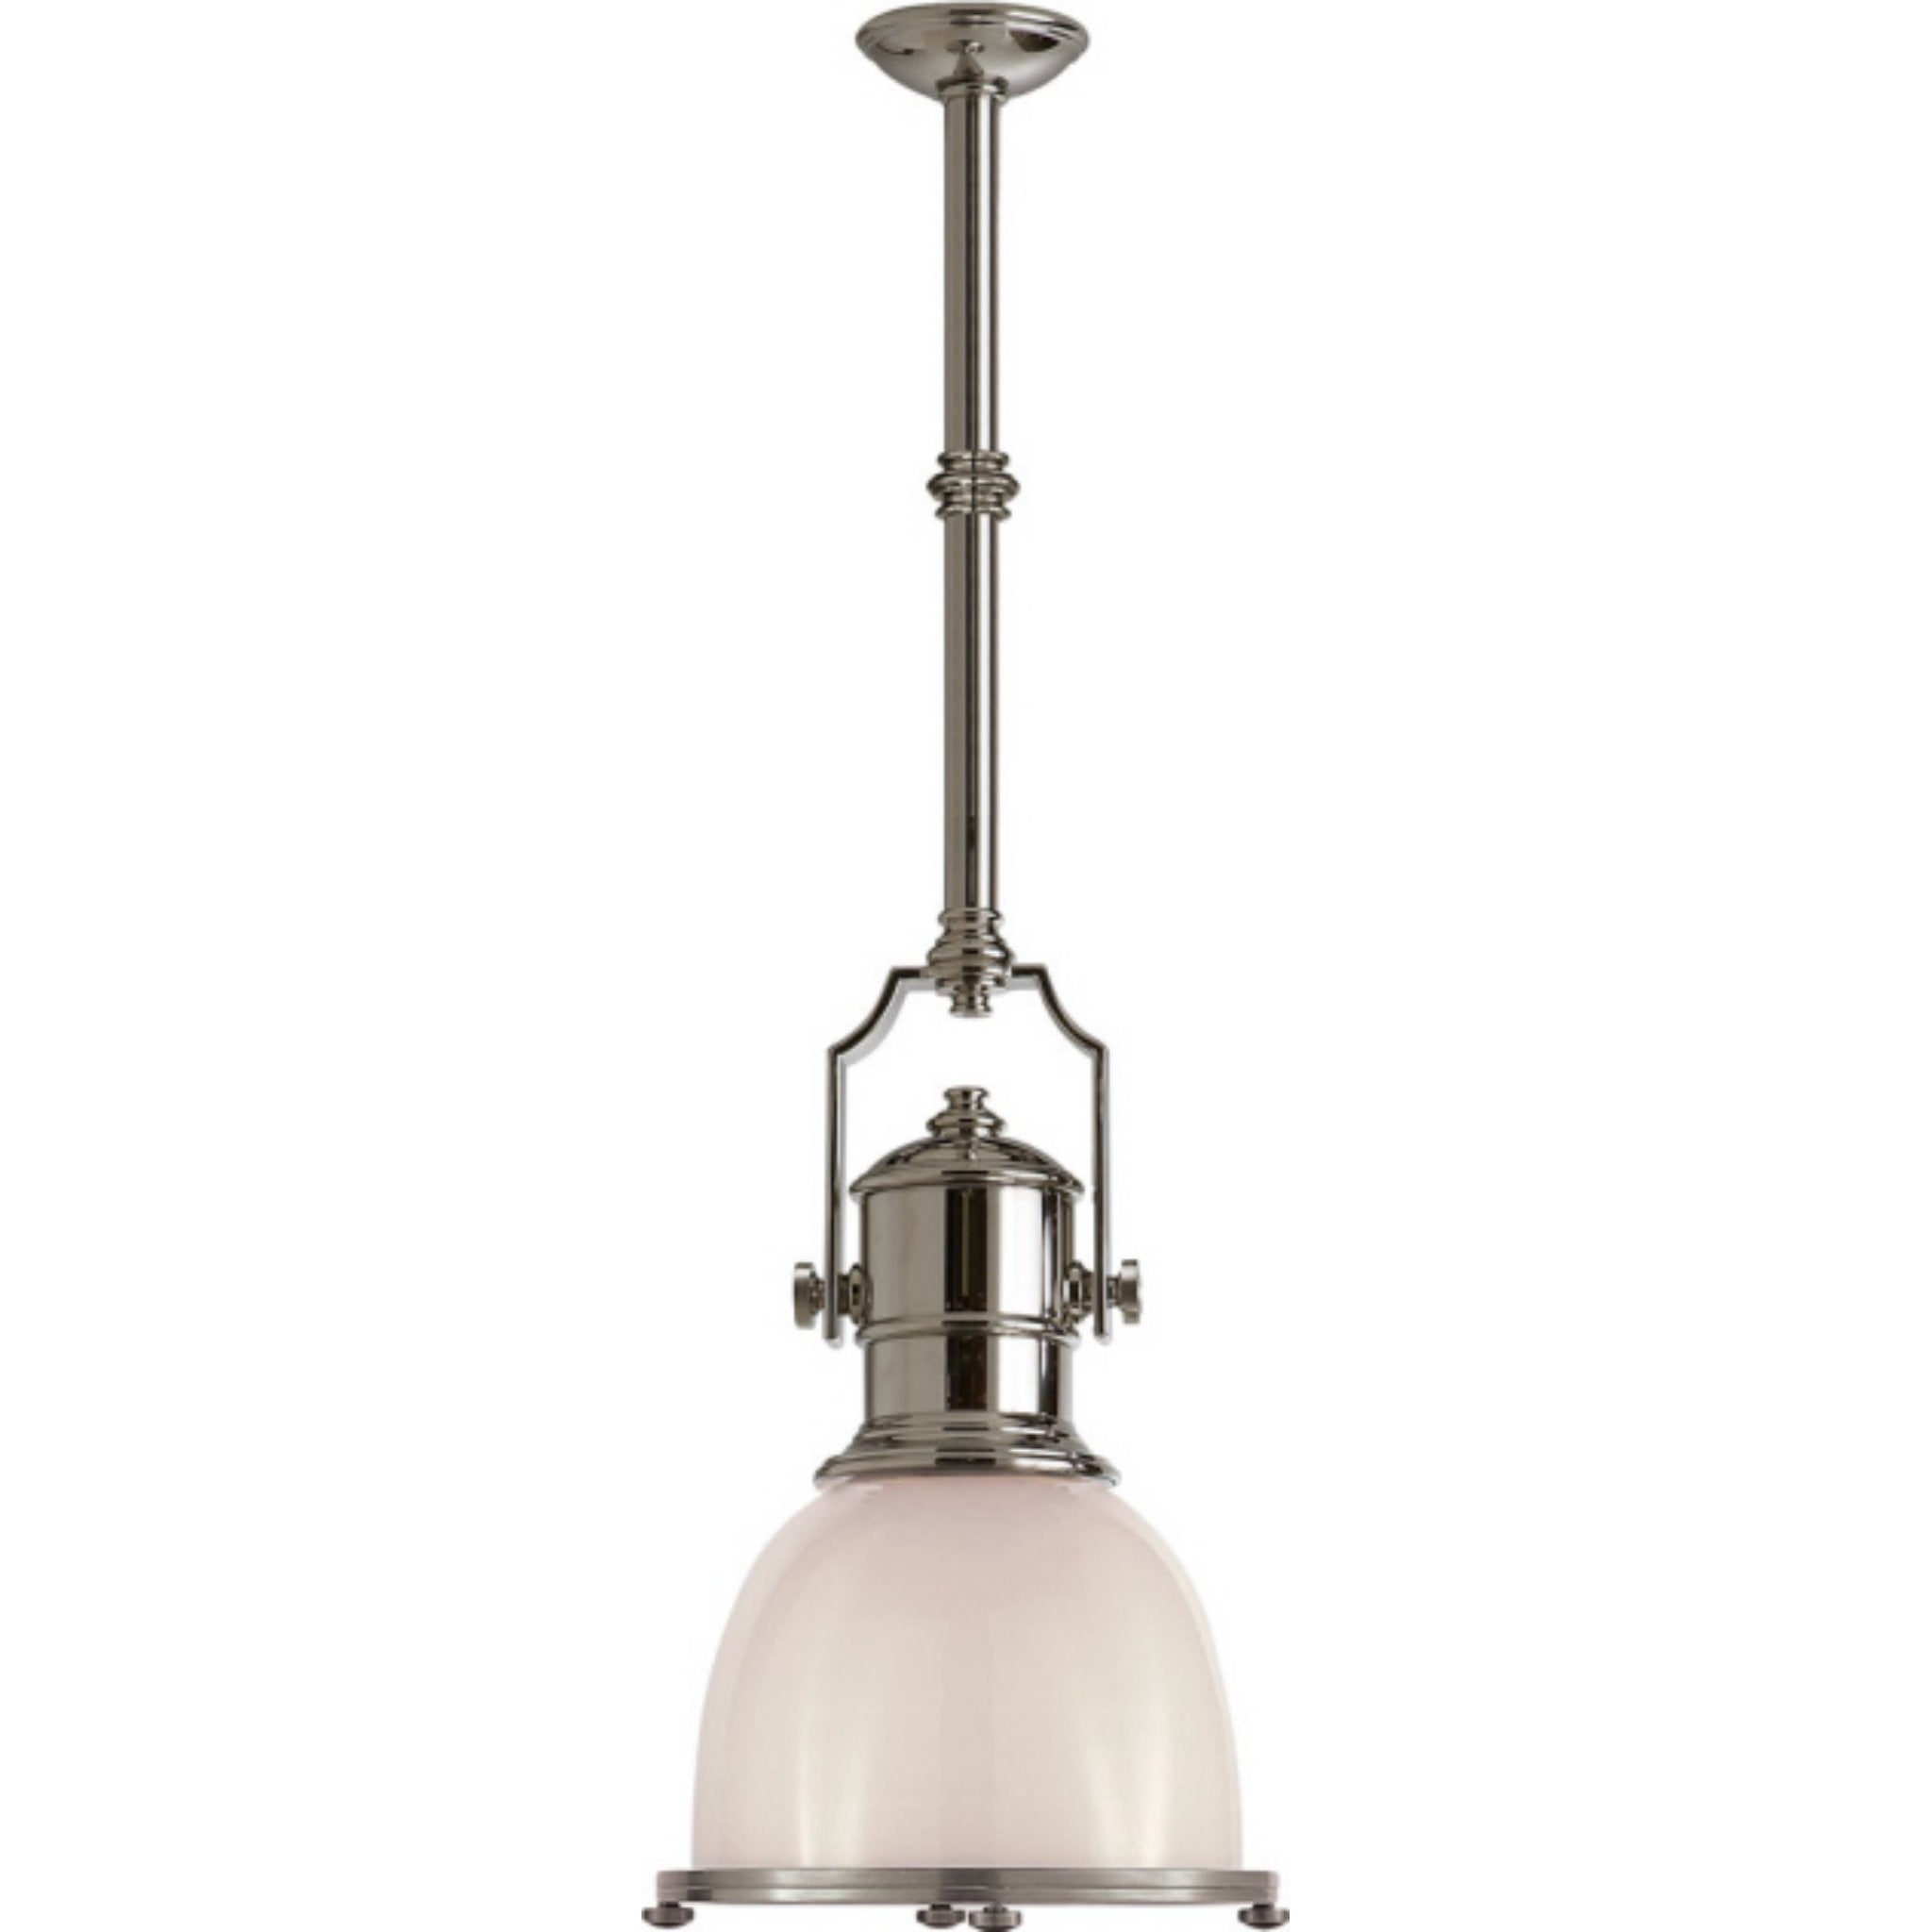 Chapman & Myers Country Industrial Small Pendant in Polished Nickel with White Glass Shade